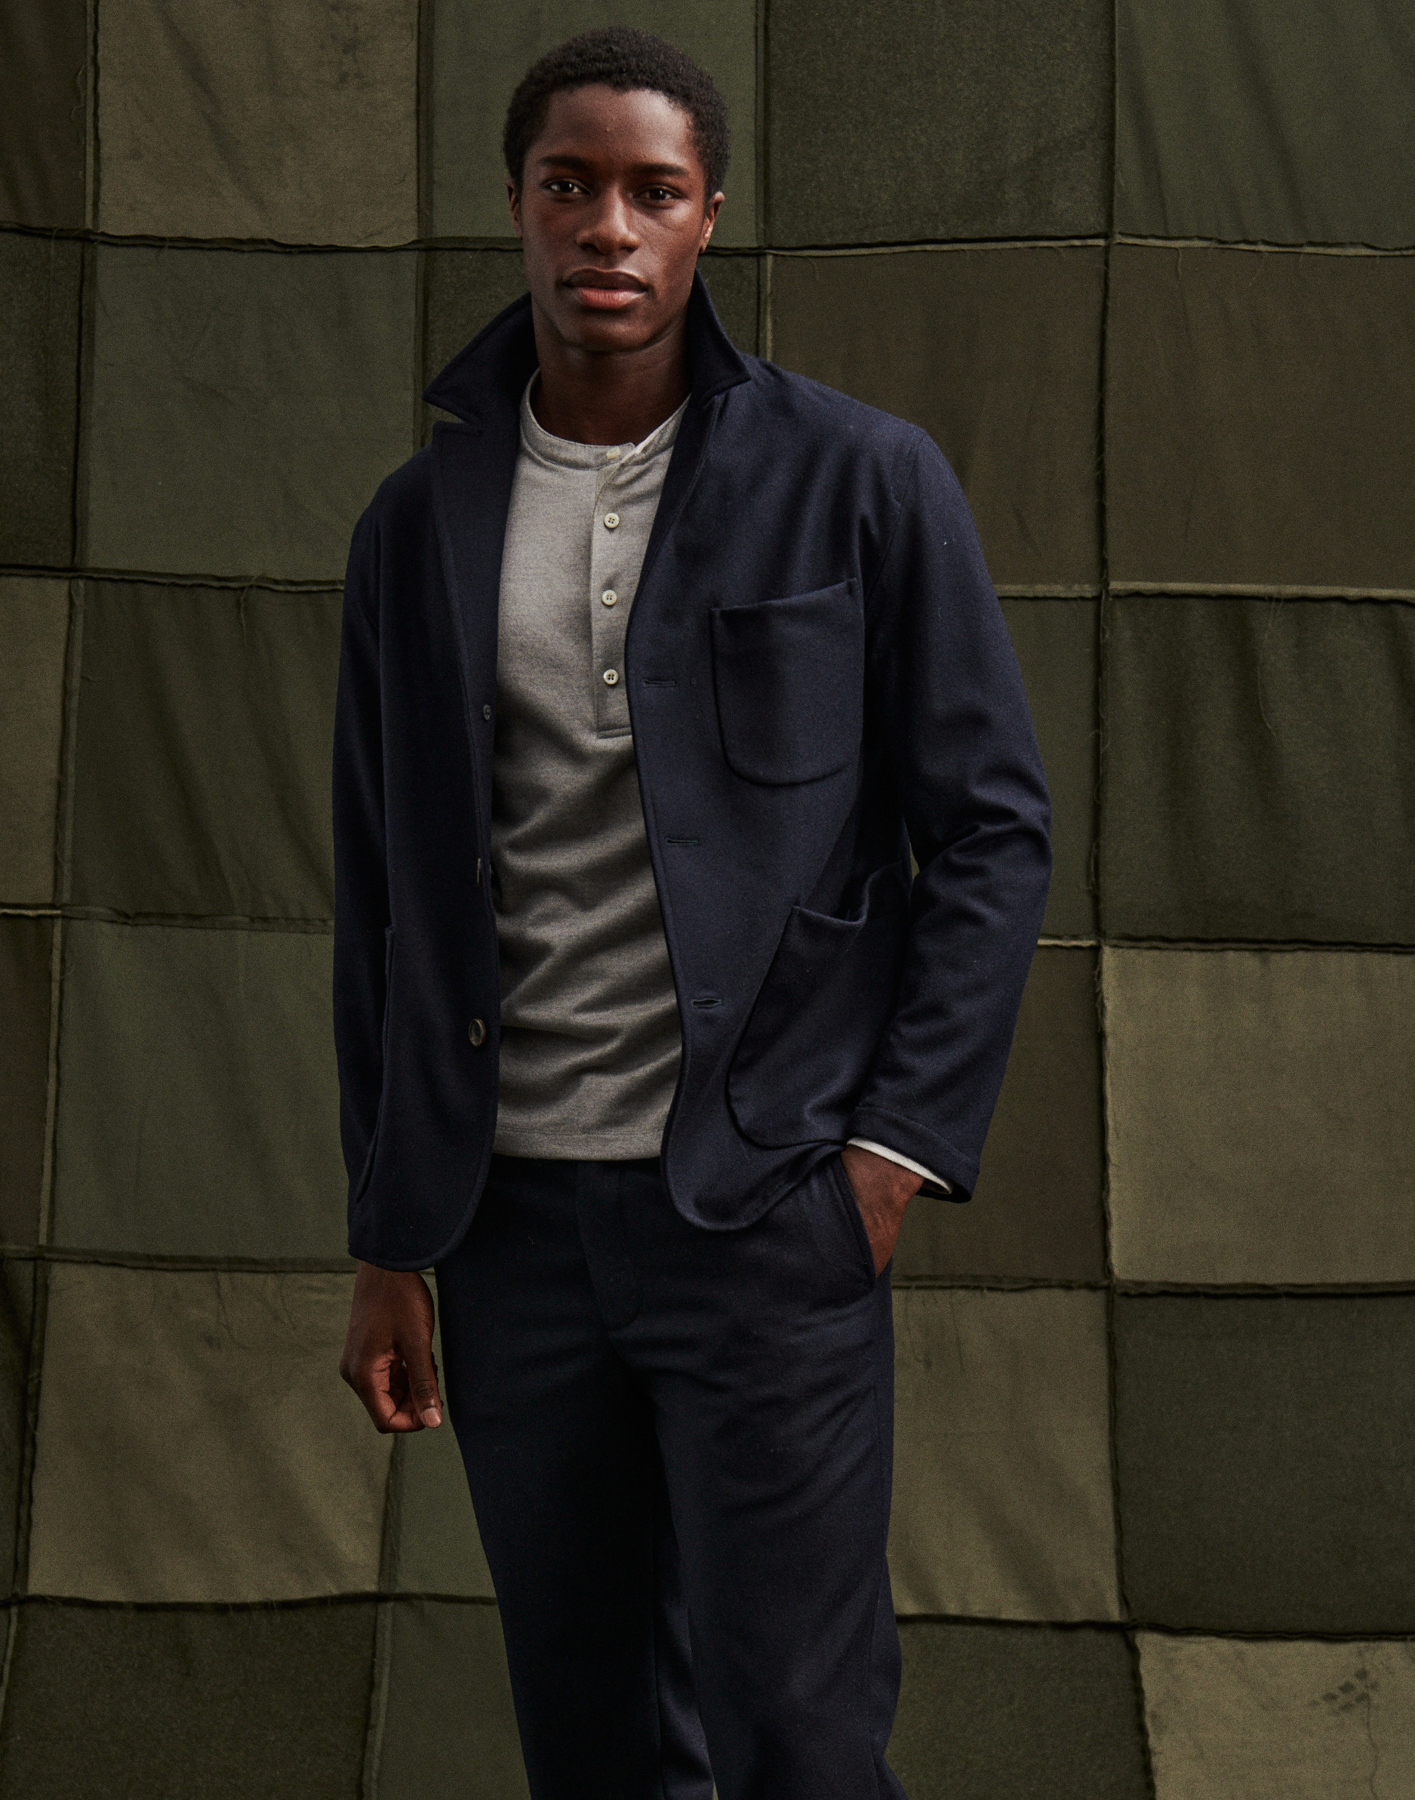 The Flâneur blazer in navy, £595; The cashblend crew trouser, £195; The cashmere Henley in light grey, £250. All Private White V.C.